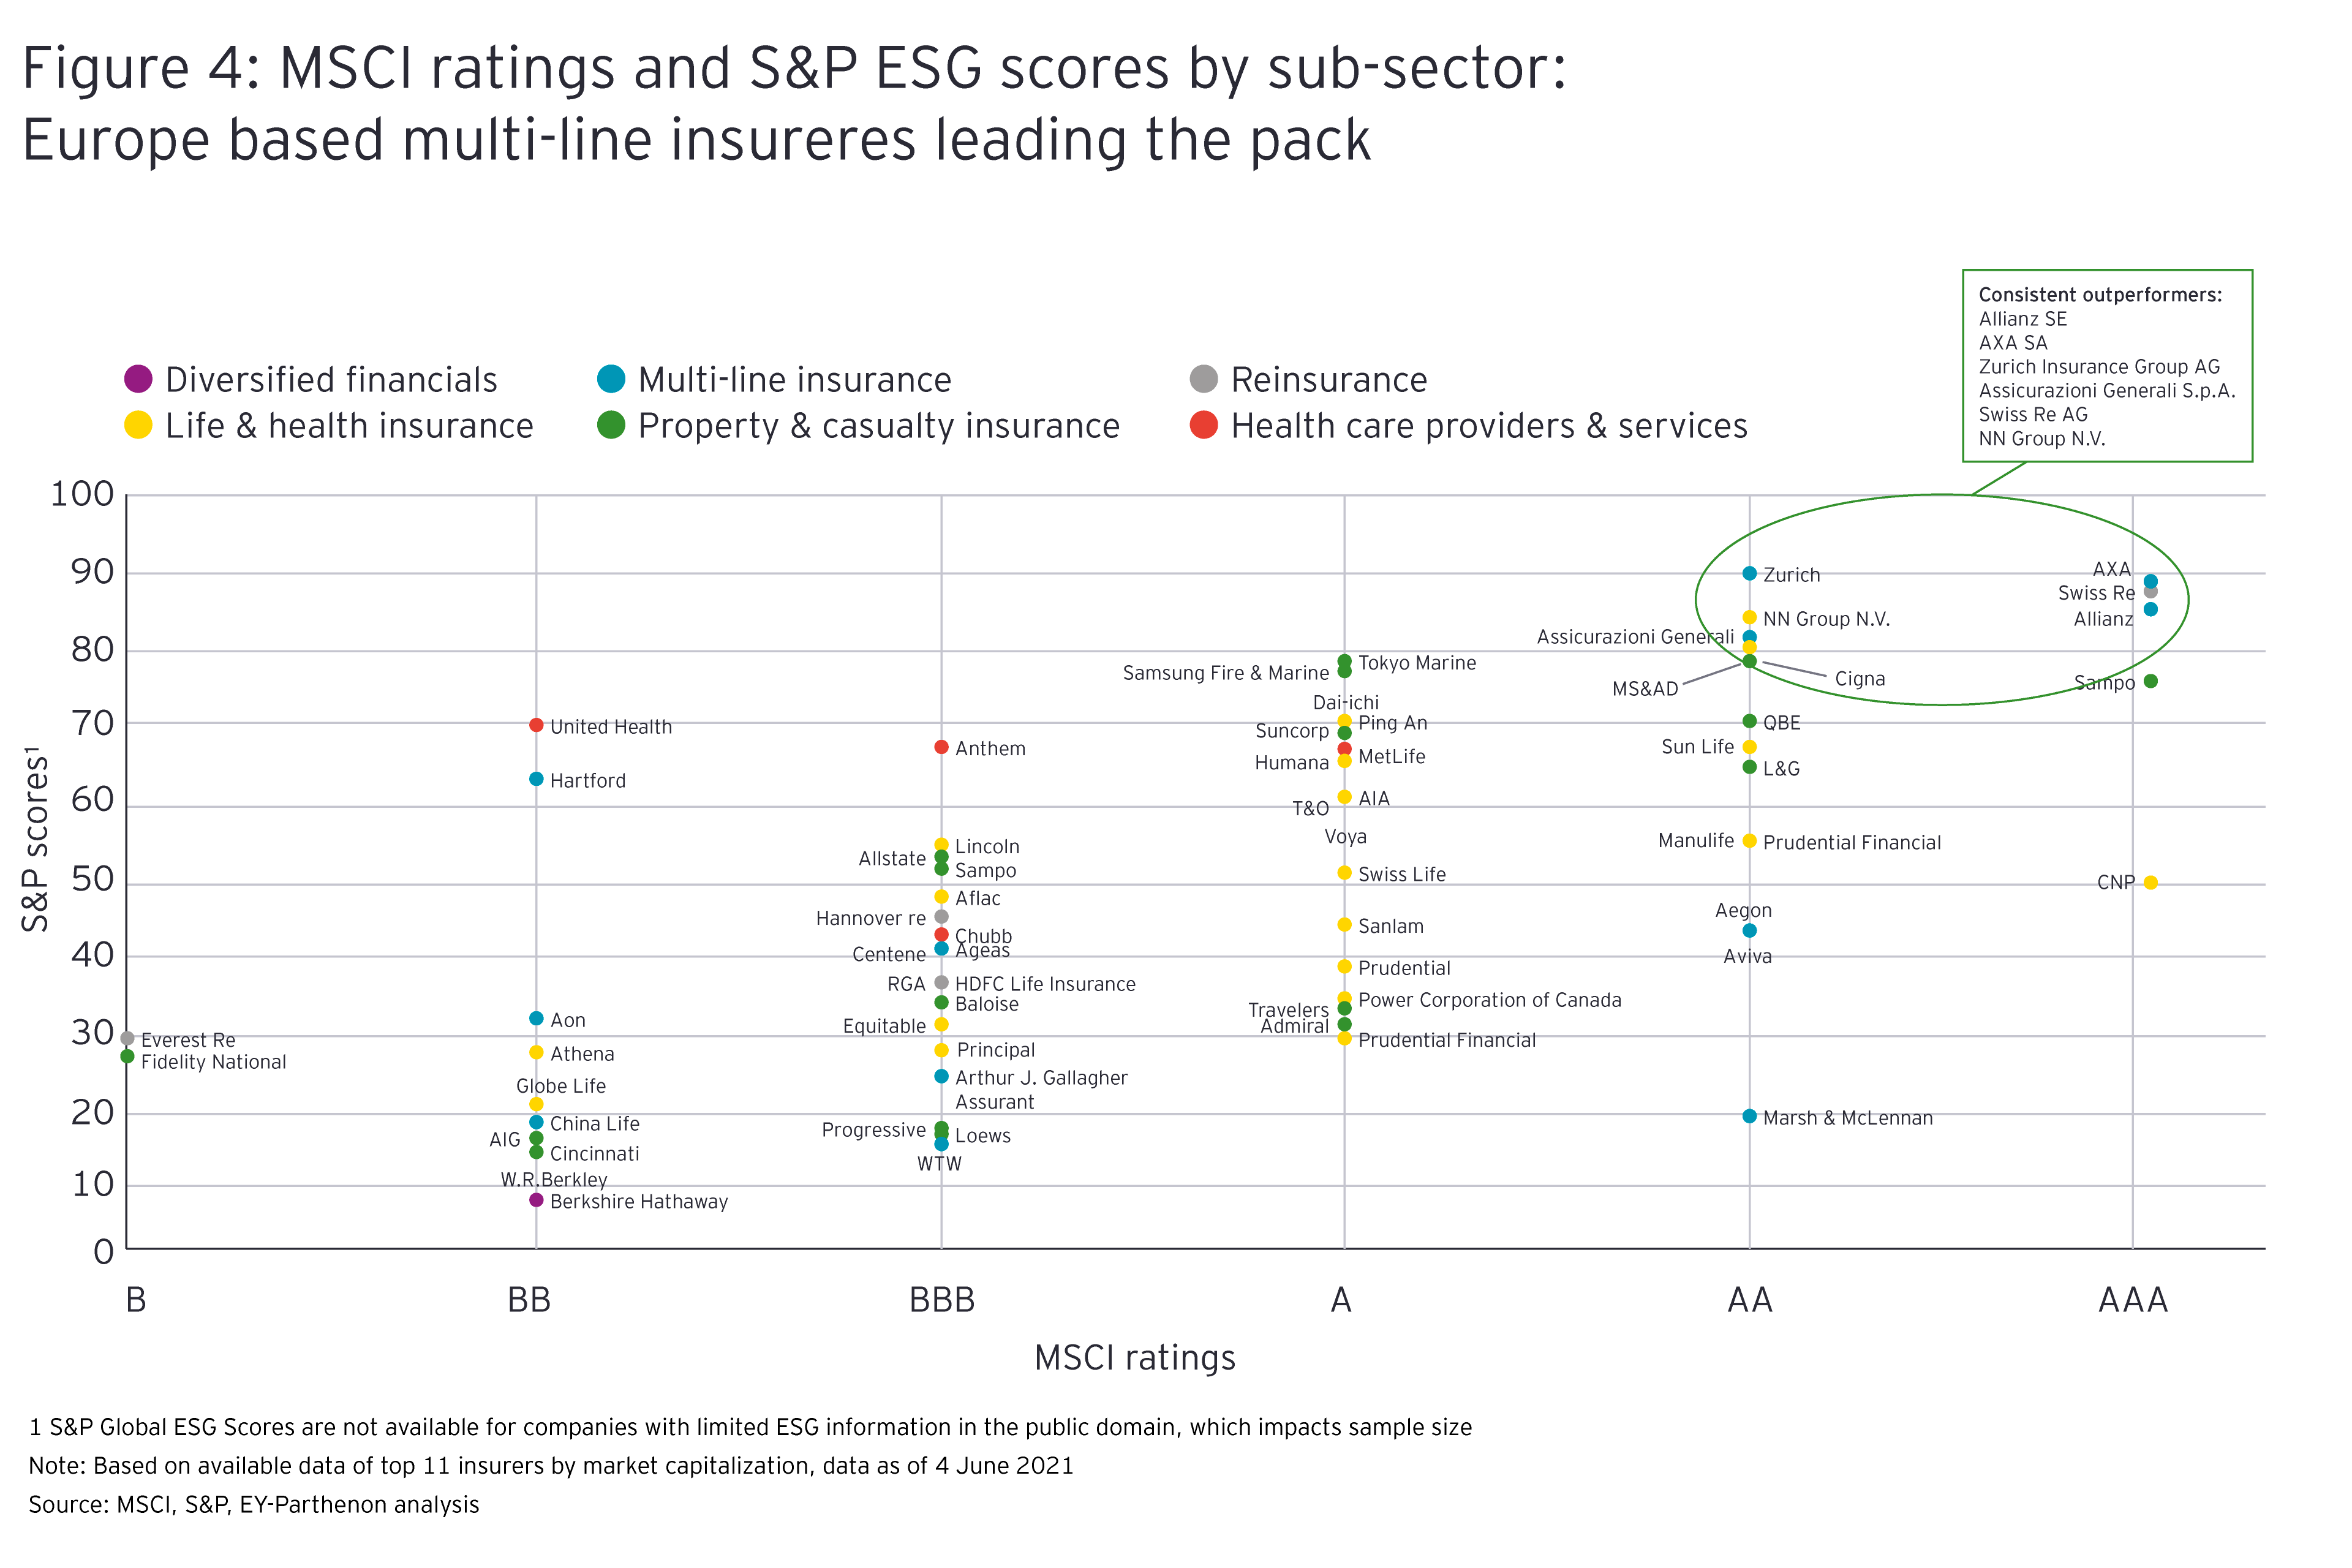 MSCI ratings and S&P ESG scores by sub-sector